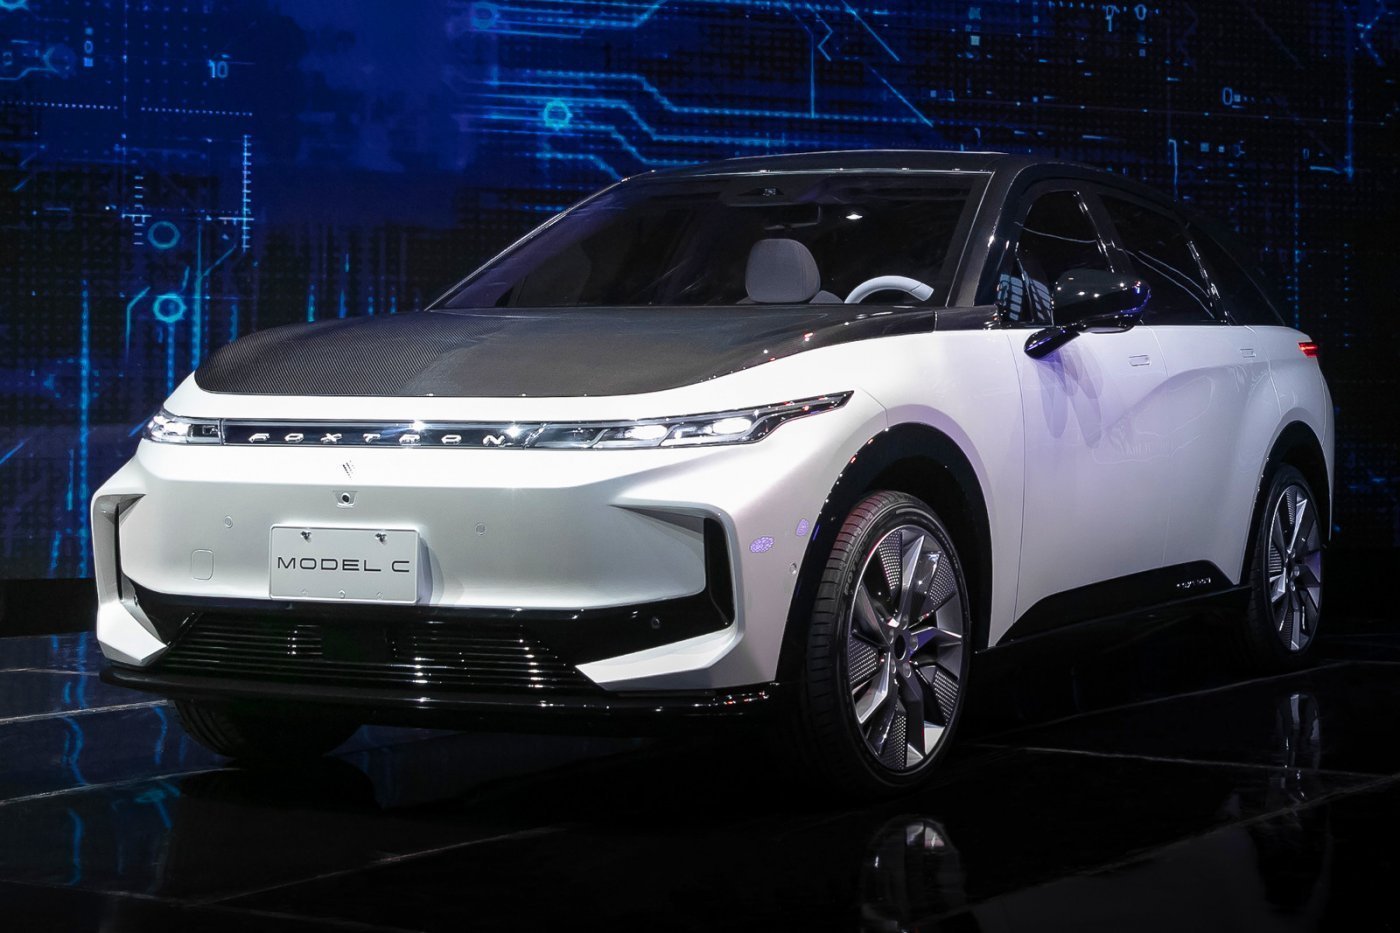 Foxconn - Car-Motor Corporation introduced its self-developed electric cars under the name Foxtron